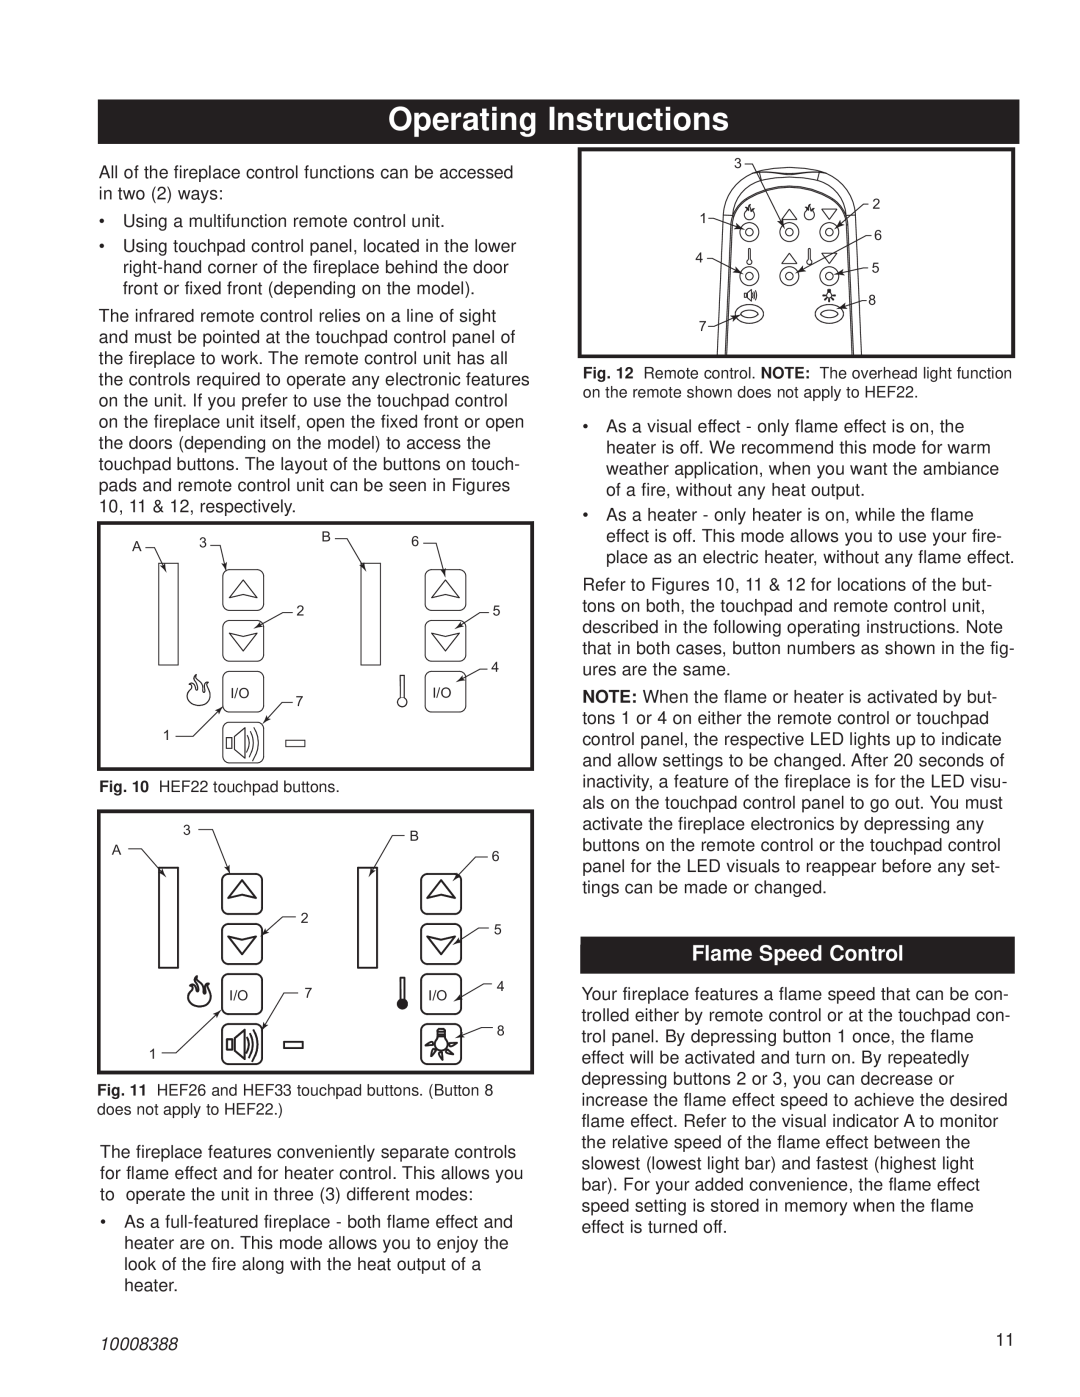 CFM Corporation HEF22 installation instructions Operating Instructions, Flame Speed Control, 10008388 